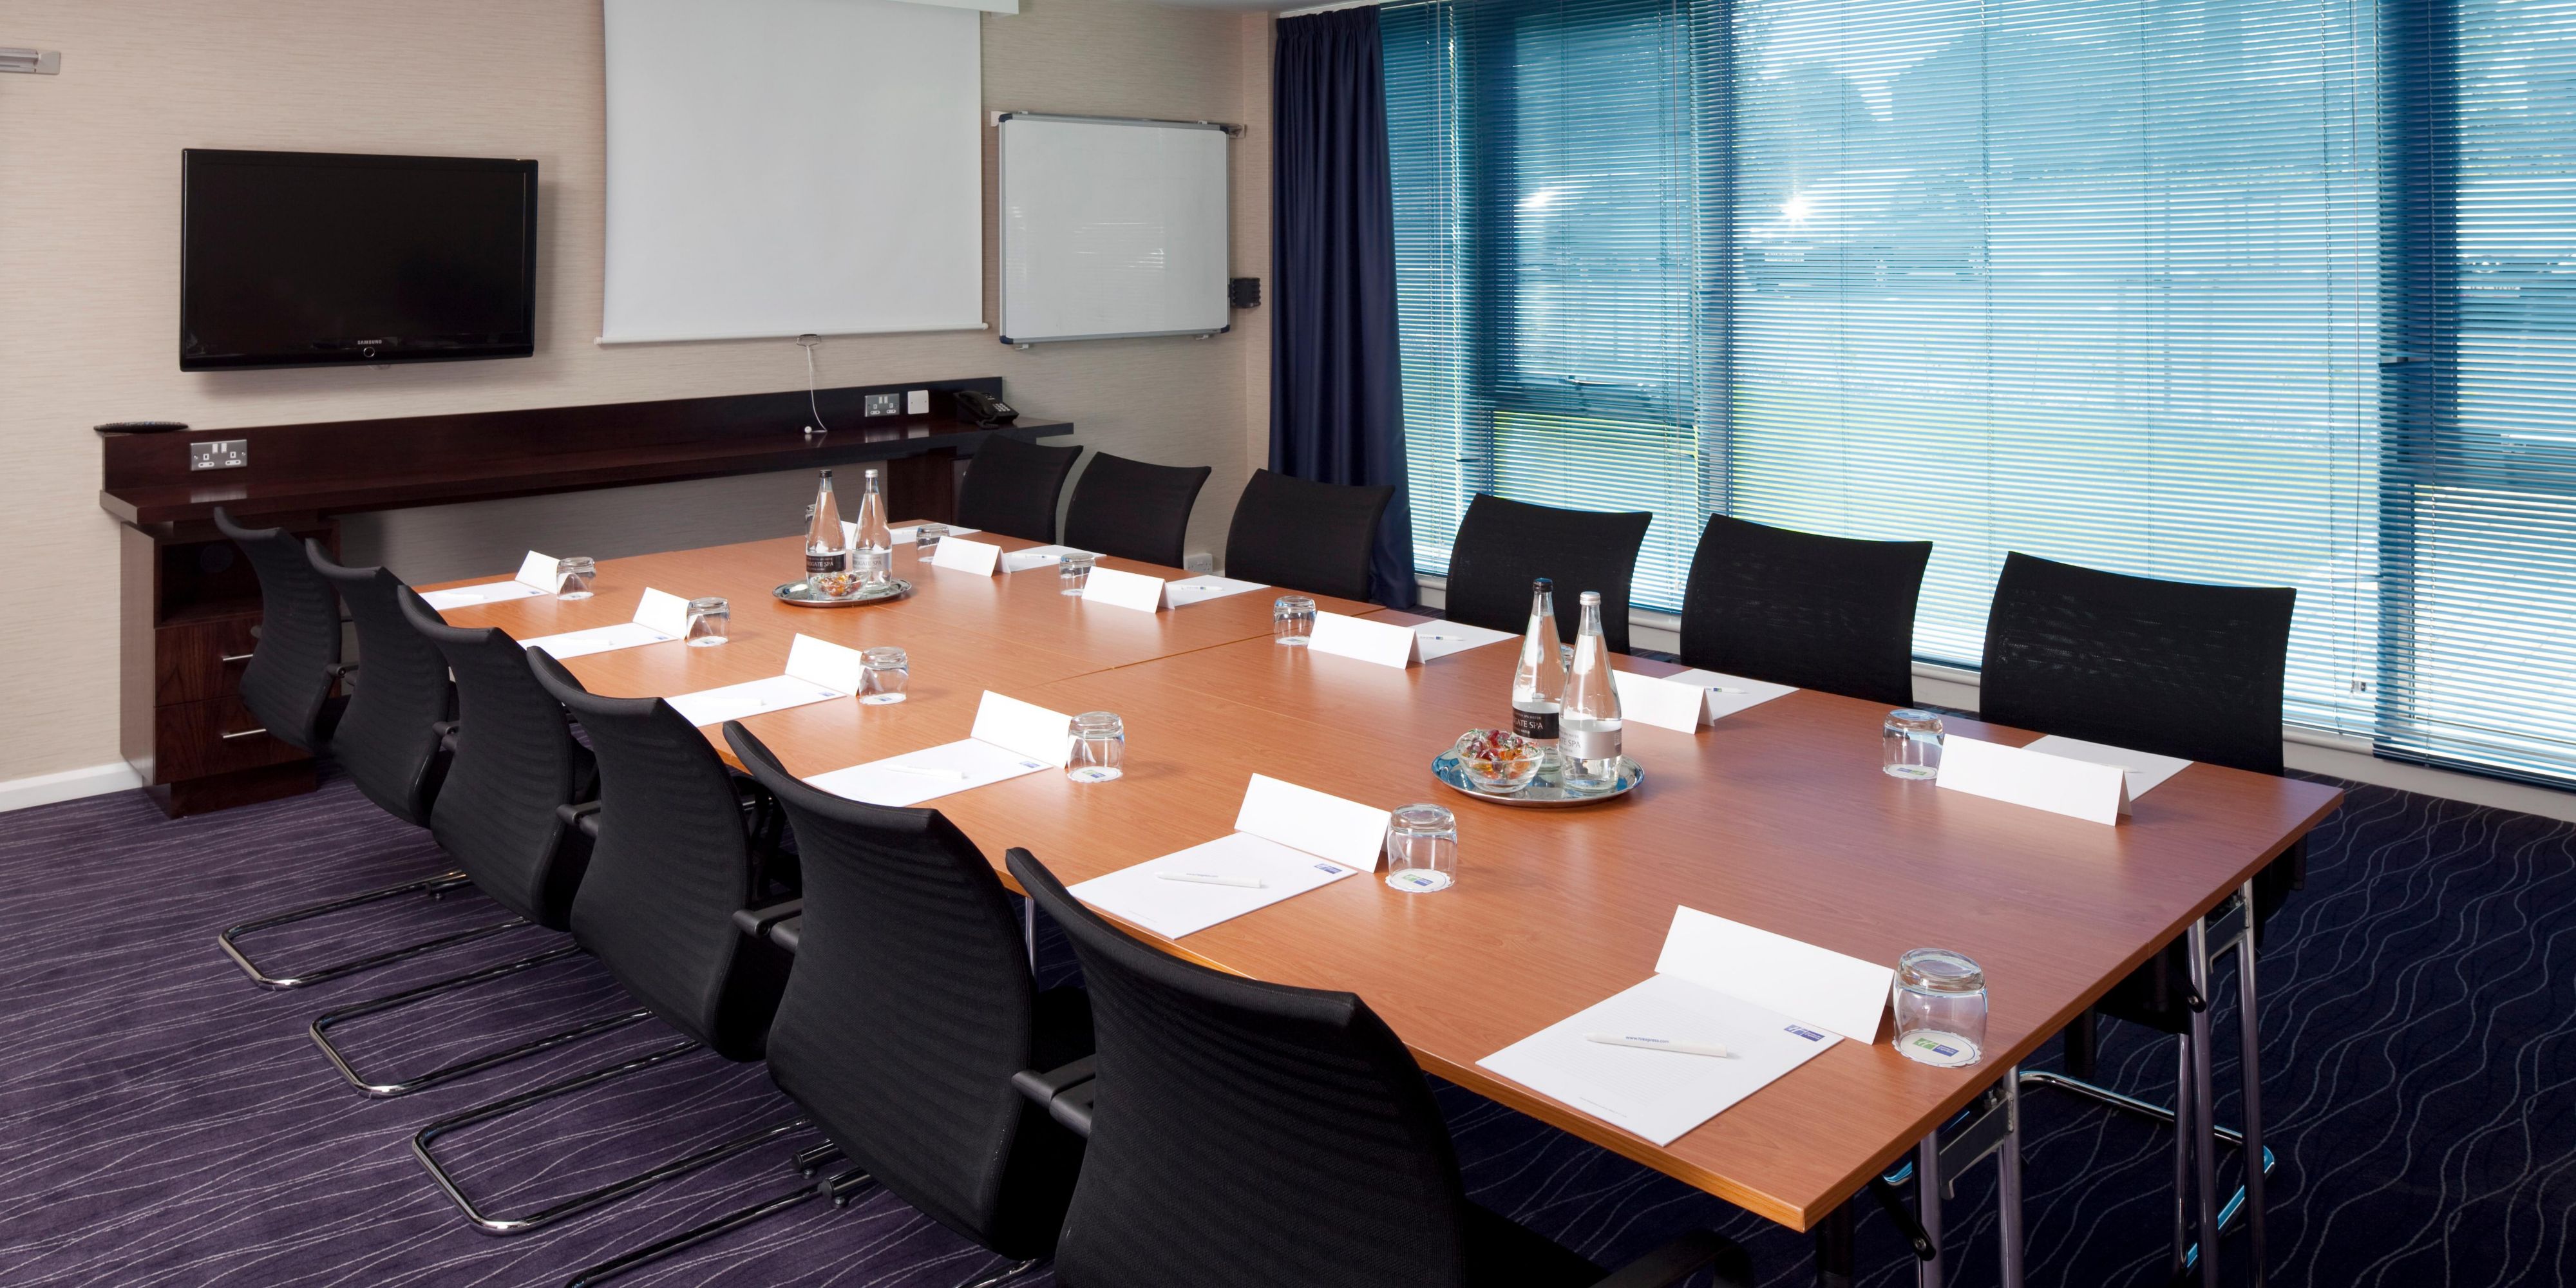 Our meeting rooms offer a handy location to get together with colleagues in a comfortable and professional environment. We can provide dining options to suit your requirements and accommodation for those travelling from further afield. Local transport is within walking distance and there's plenty of onsite parking.